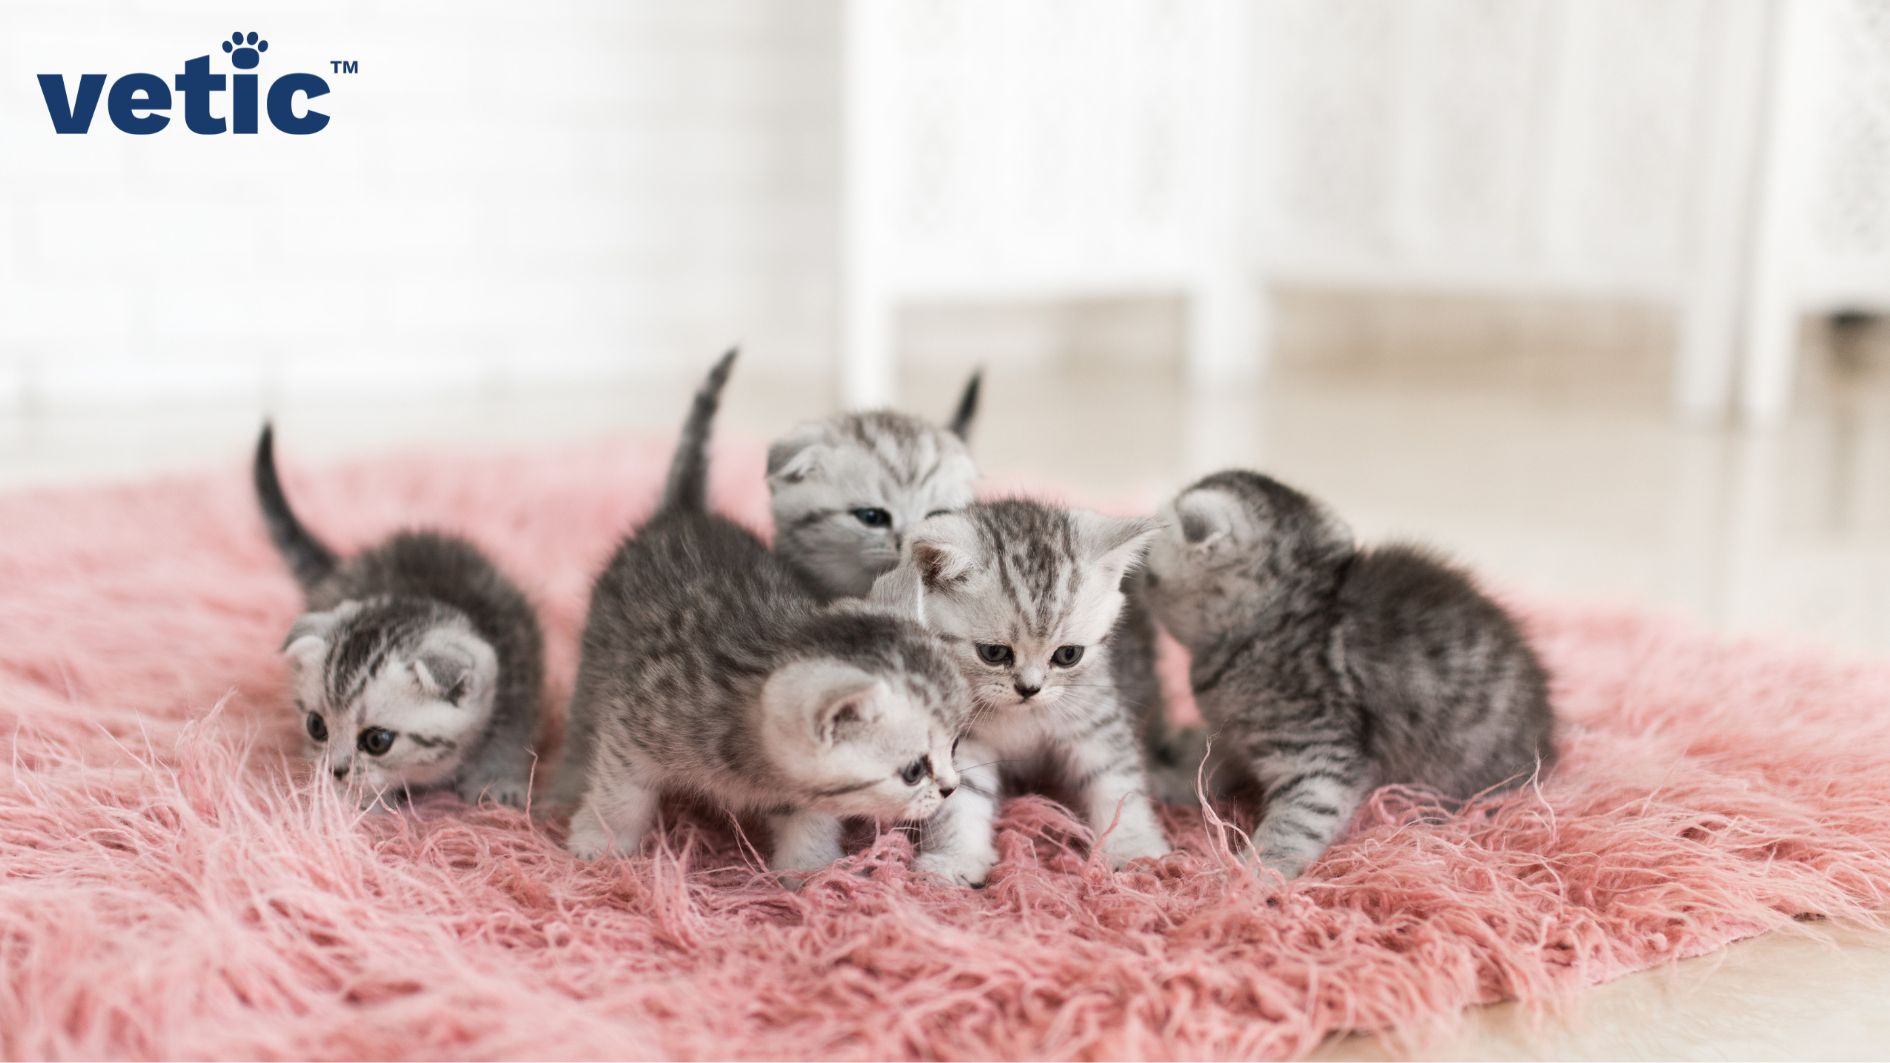 5 grey, mackerel kittens in various positions, sitting and standing together on a pink furry rug.